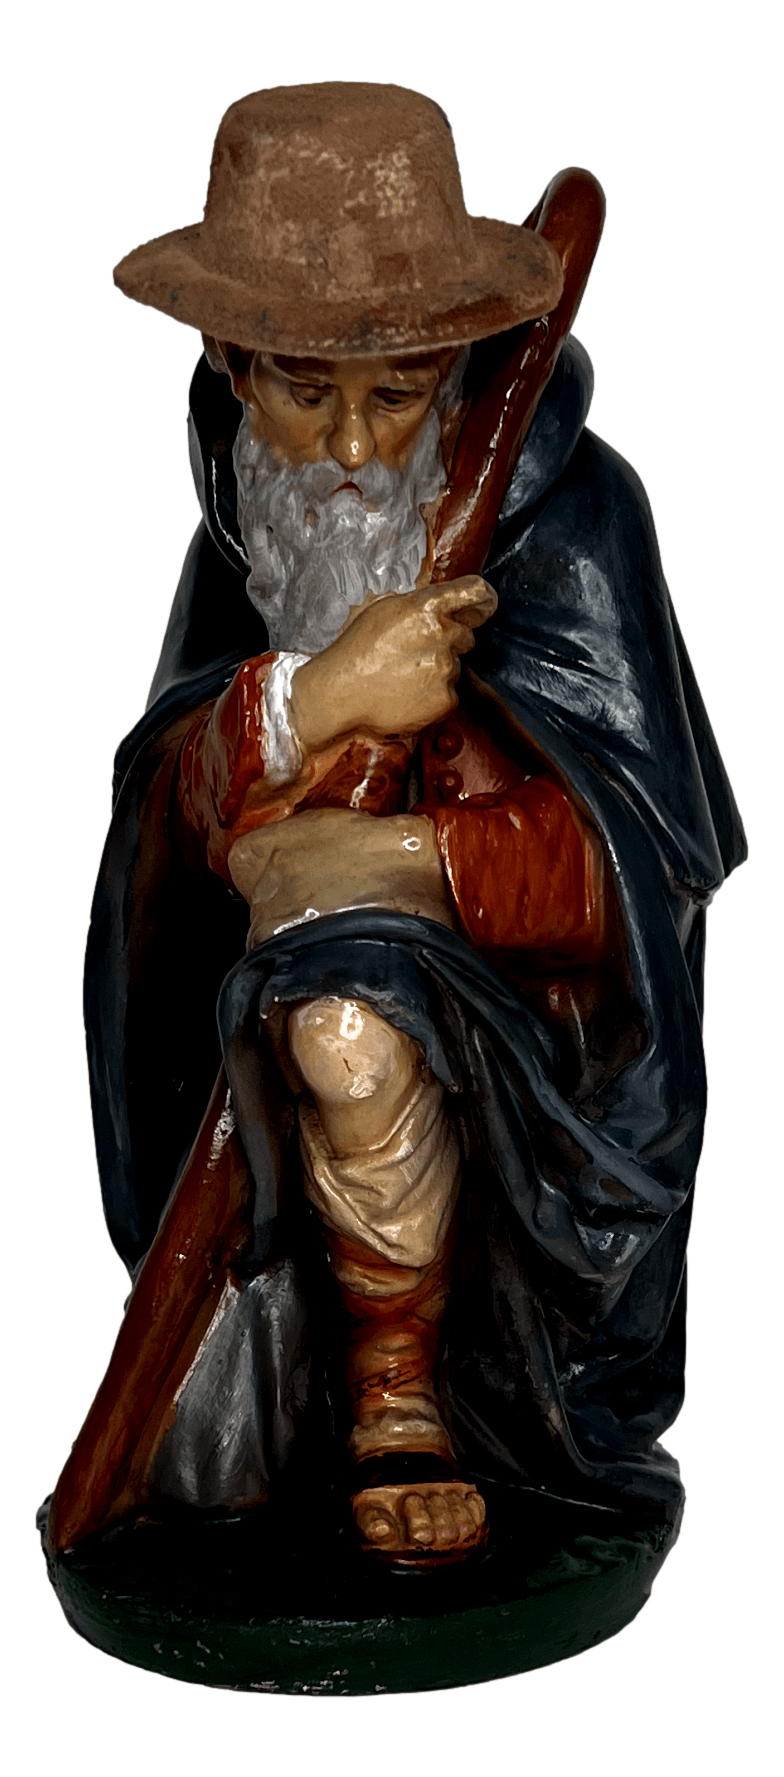 Statue Saint Roch Patron Saint of Invalids Invoked Against Plague Italy Chalkware Full Restoration By El Paso Artist Norma H: 11.50 inches X W: 7 inches - Ysleta Mission Gift Shop- VOTED El Paso's Best Gift Shop